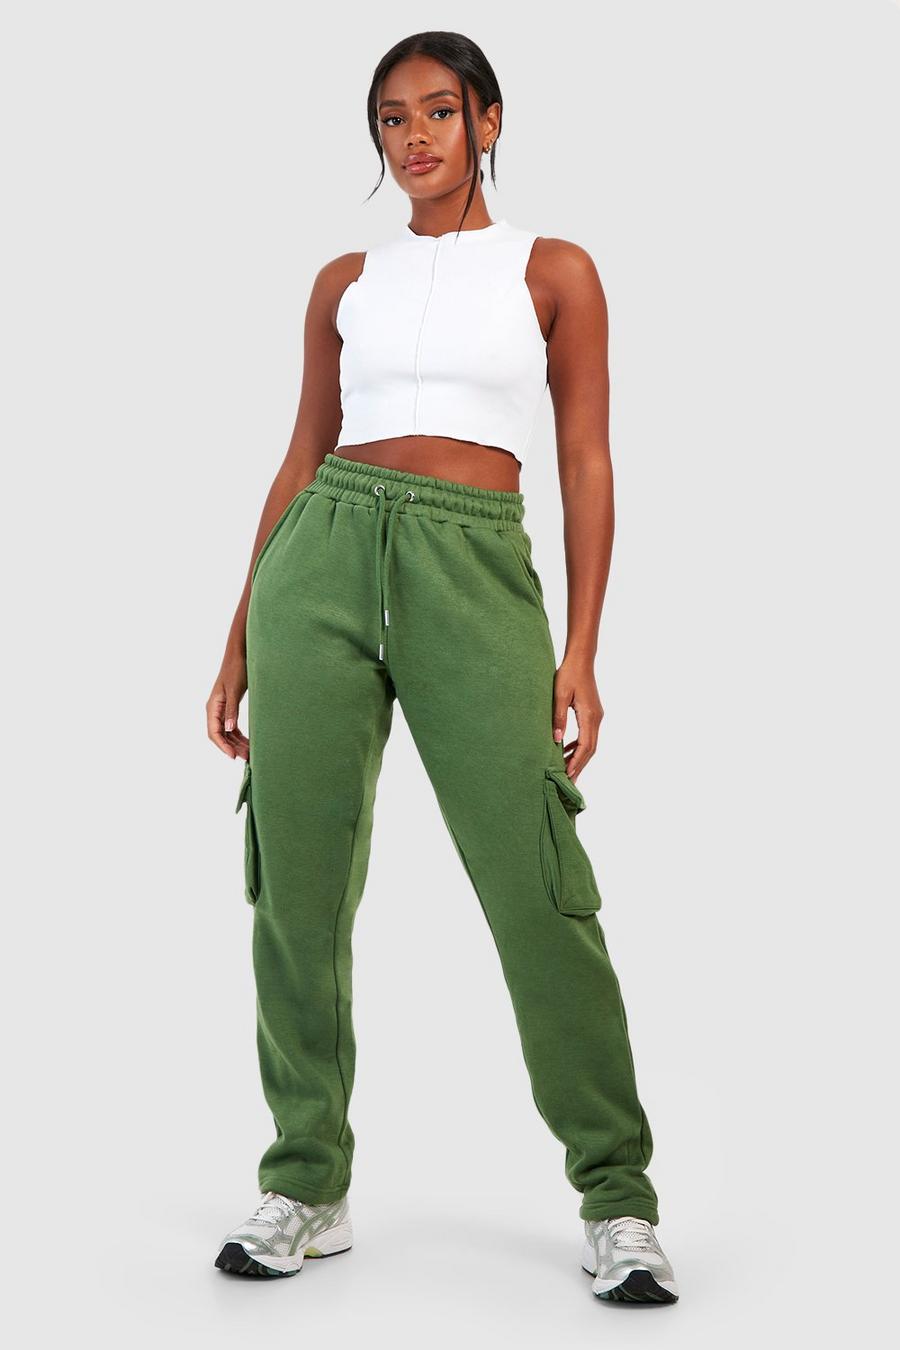 CARGO JOGGER PANTS（wide fit）